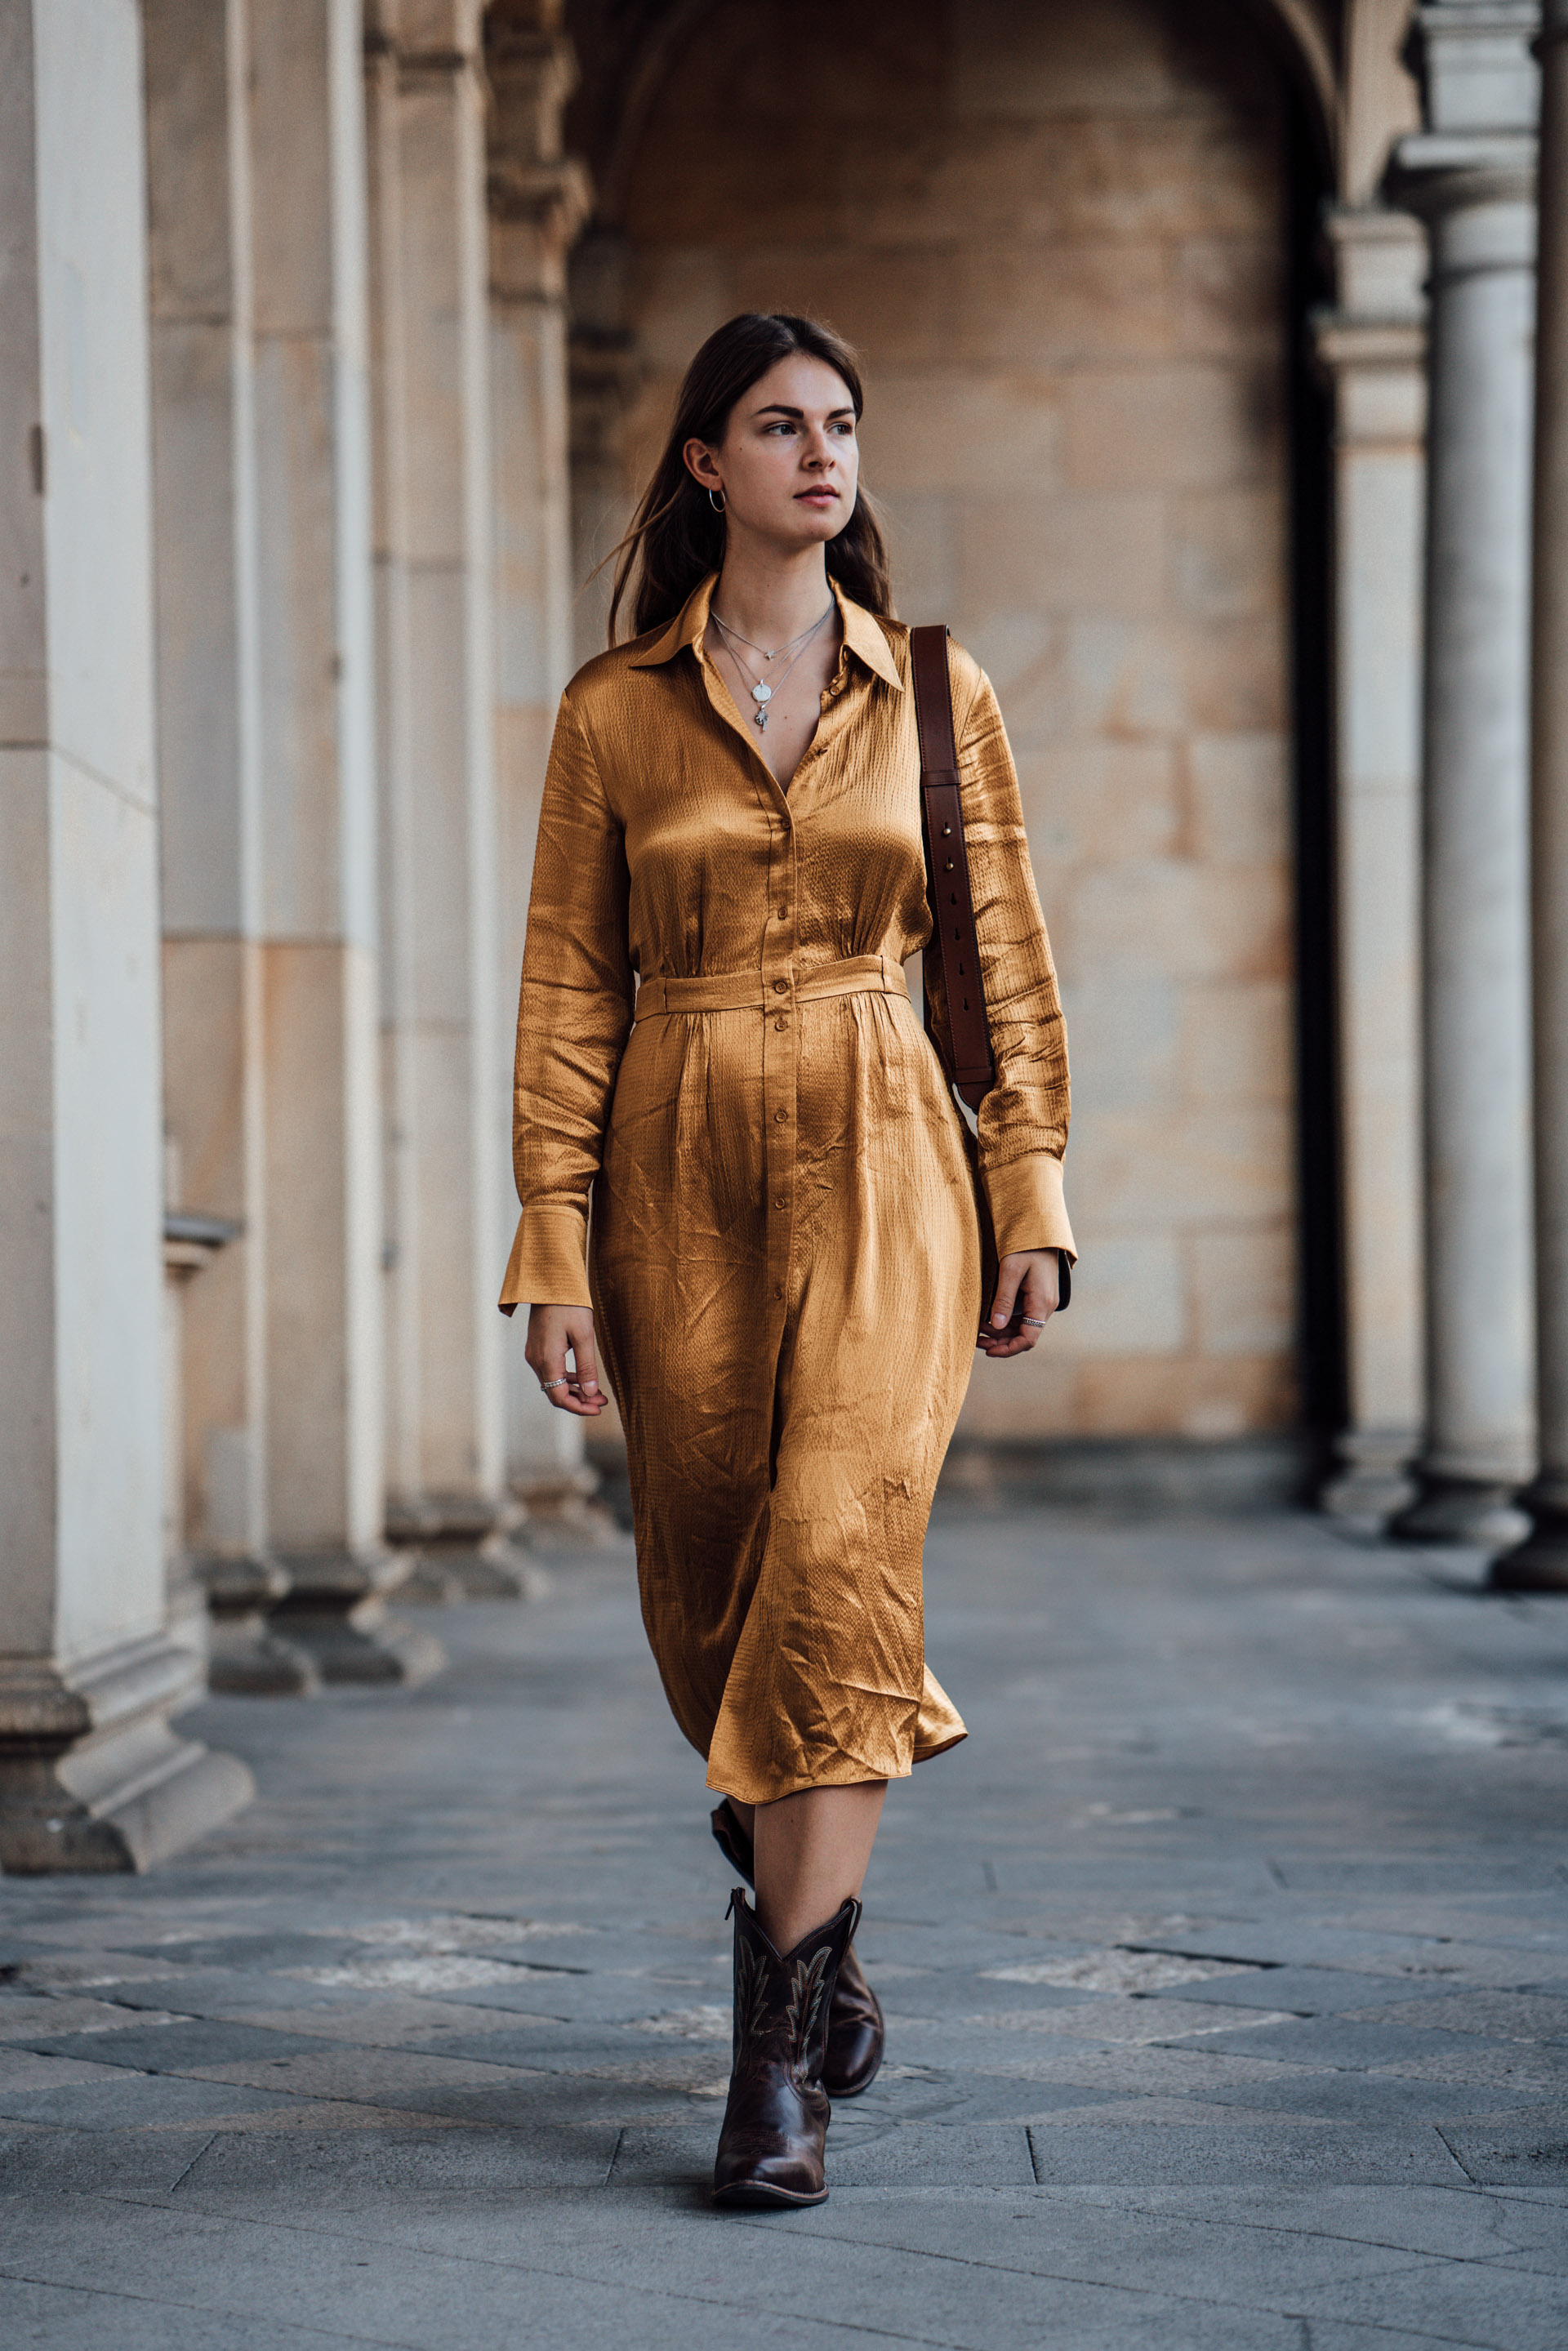 Midi Dress combined with Cowboy Boots 